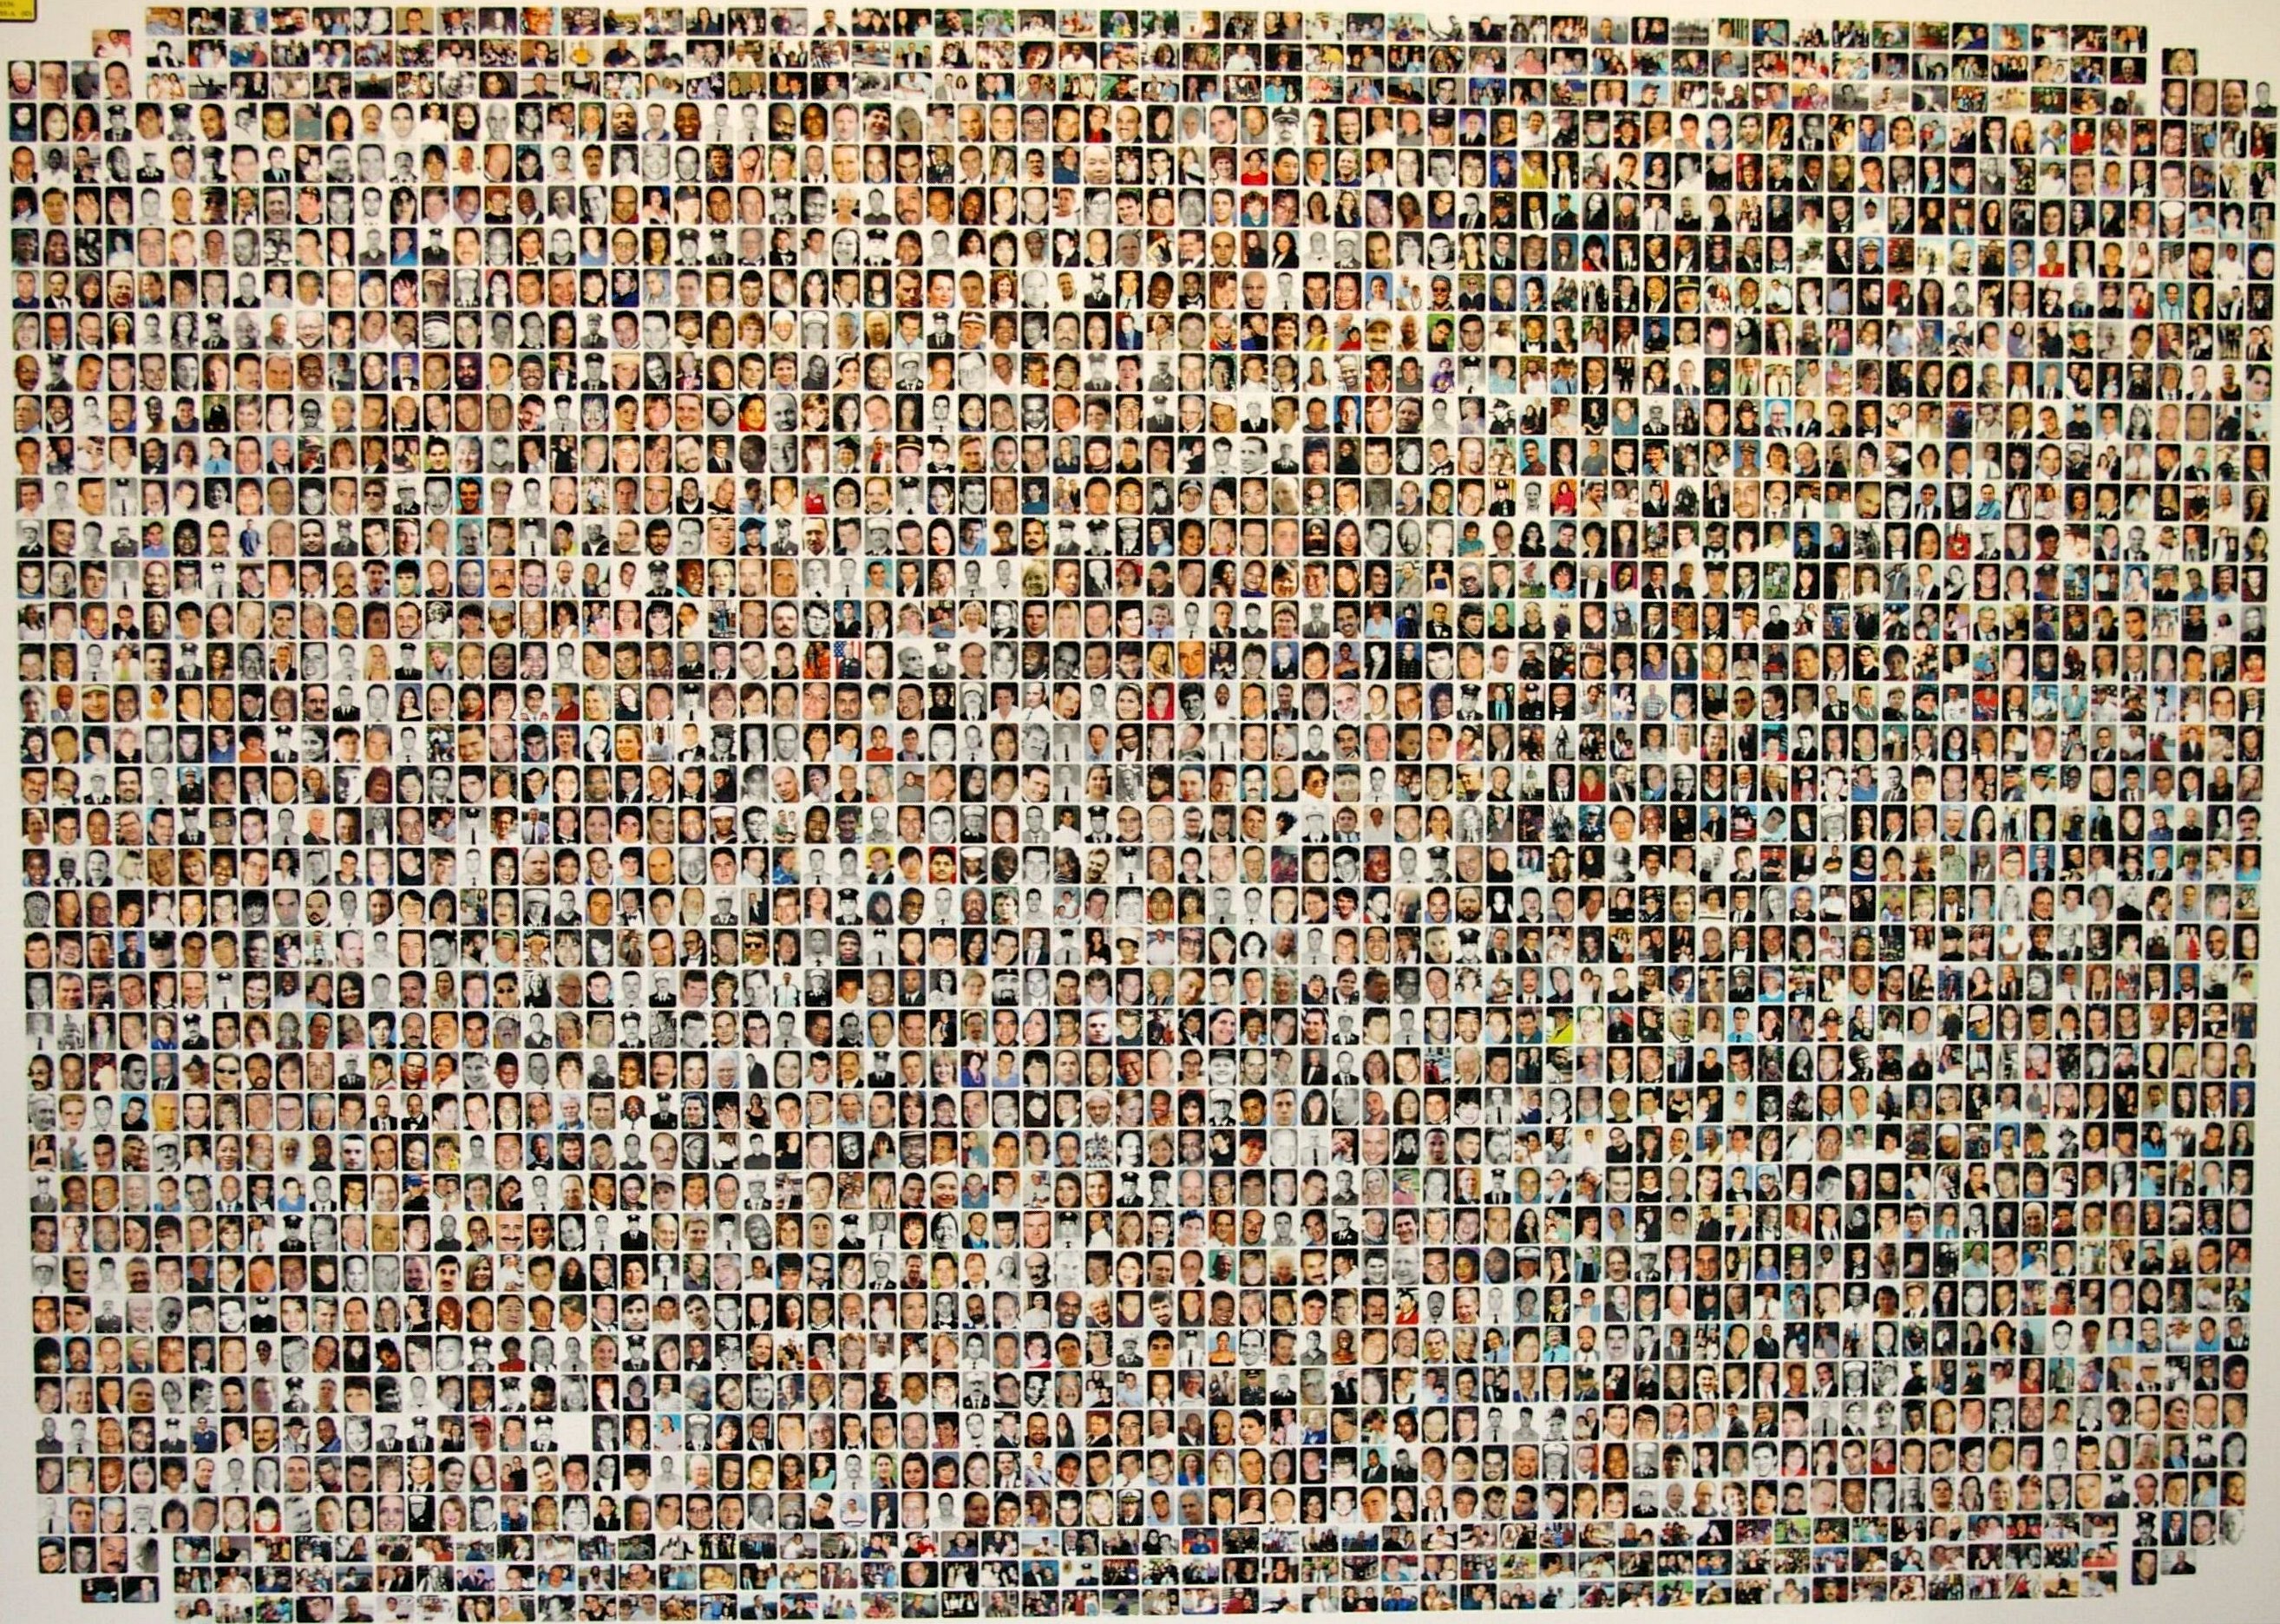 A collection of photographs of those killed (except for 92 victims and terrorists) during the terrorists attacks on September 11, 2001. his image is a work of a United States Department of Justice employee, taken or made during the course of an employee's official duties.